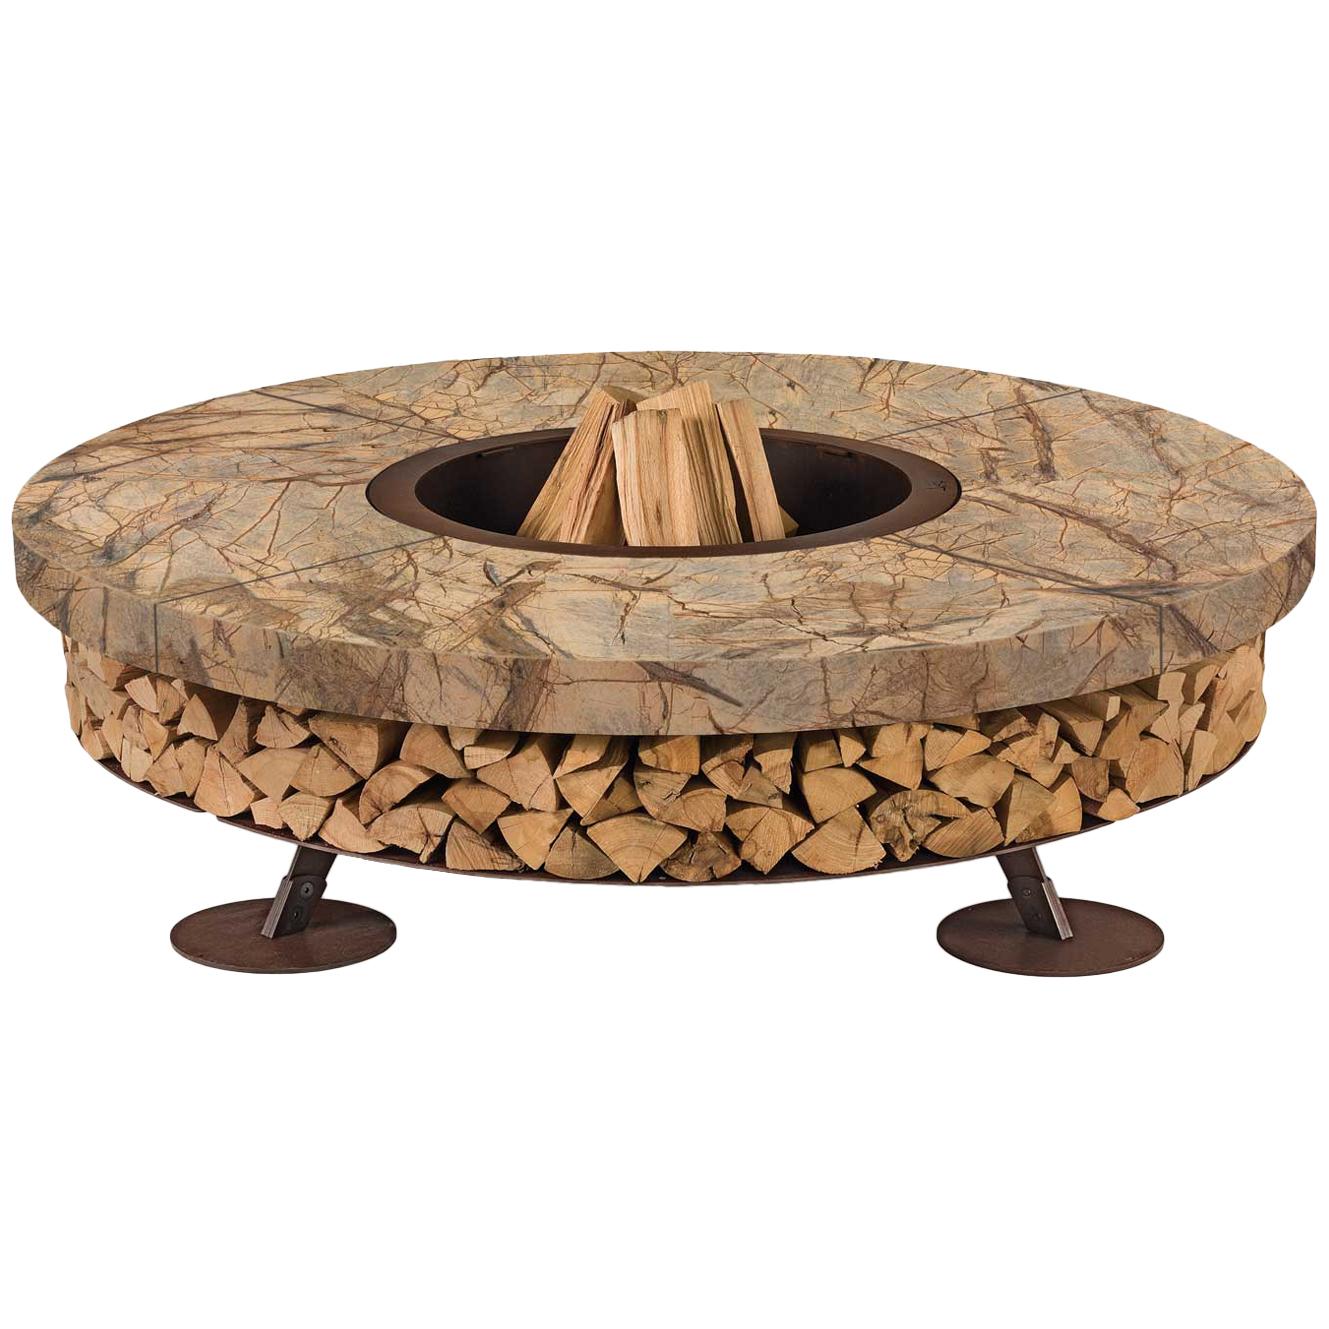 Ercole Small Rain Forest Brown Marble Fire Pit by AK47 Design For Sale